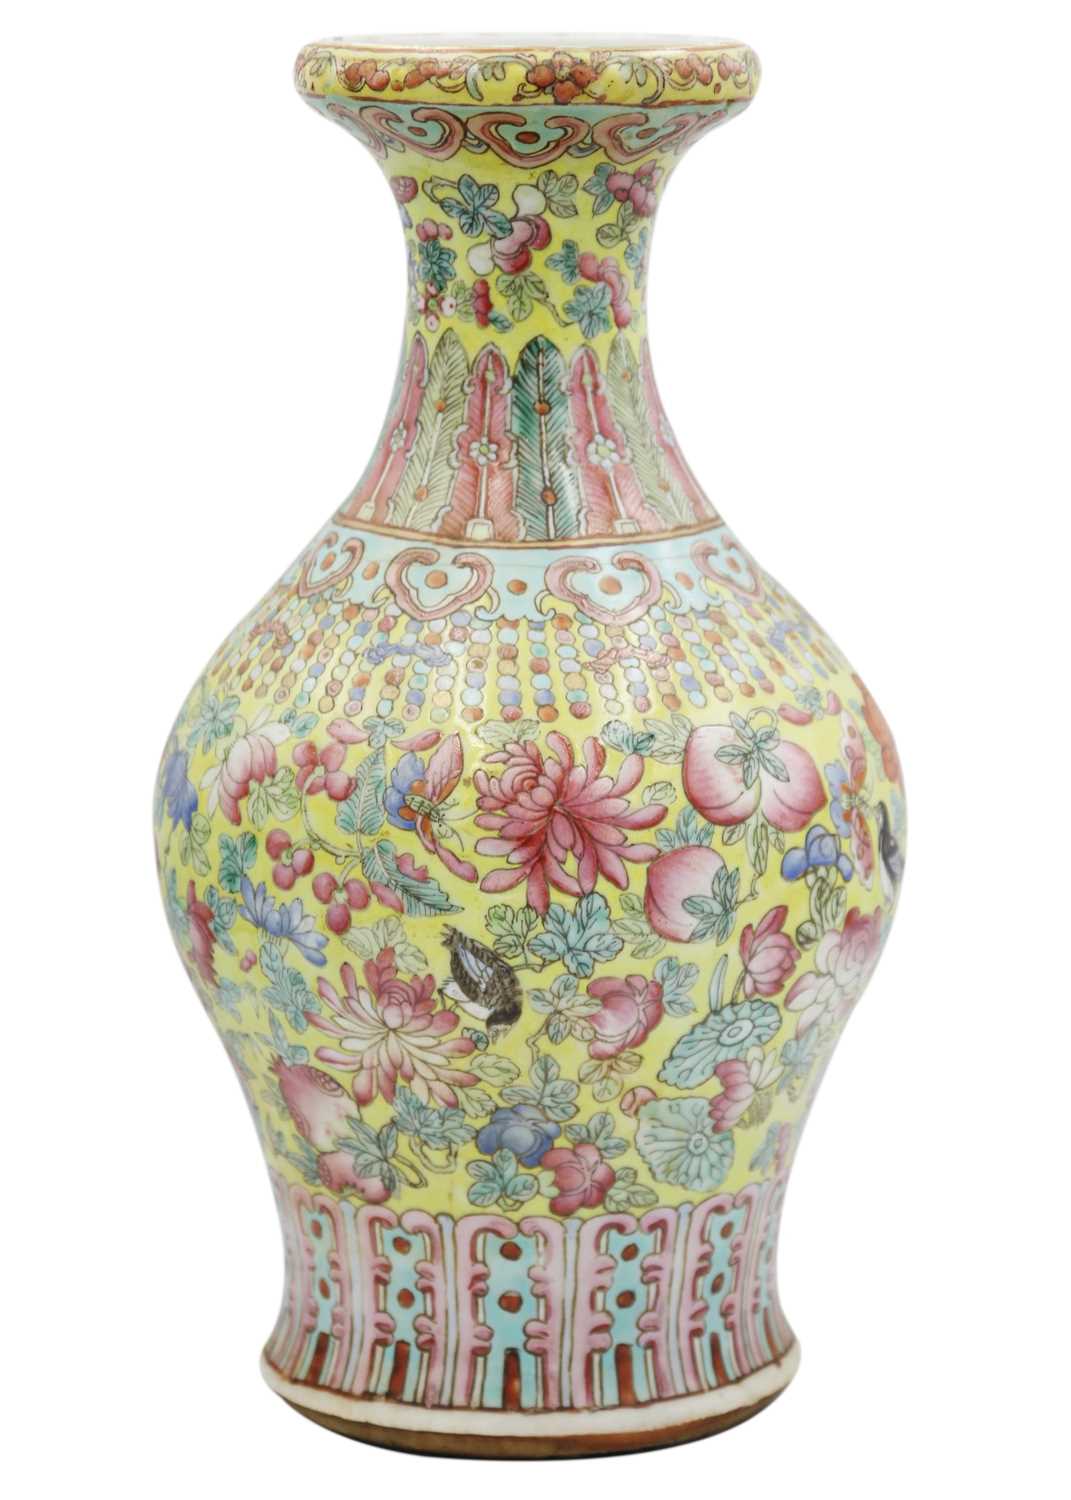 A Chinese famille juan porcelain vase, Tongzhi mark and period. (1861-1874)